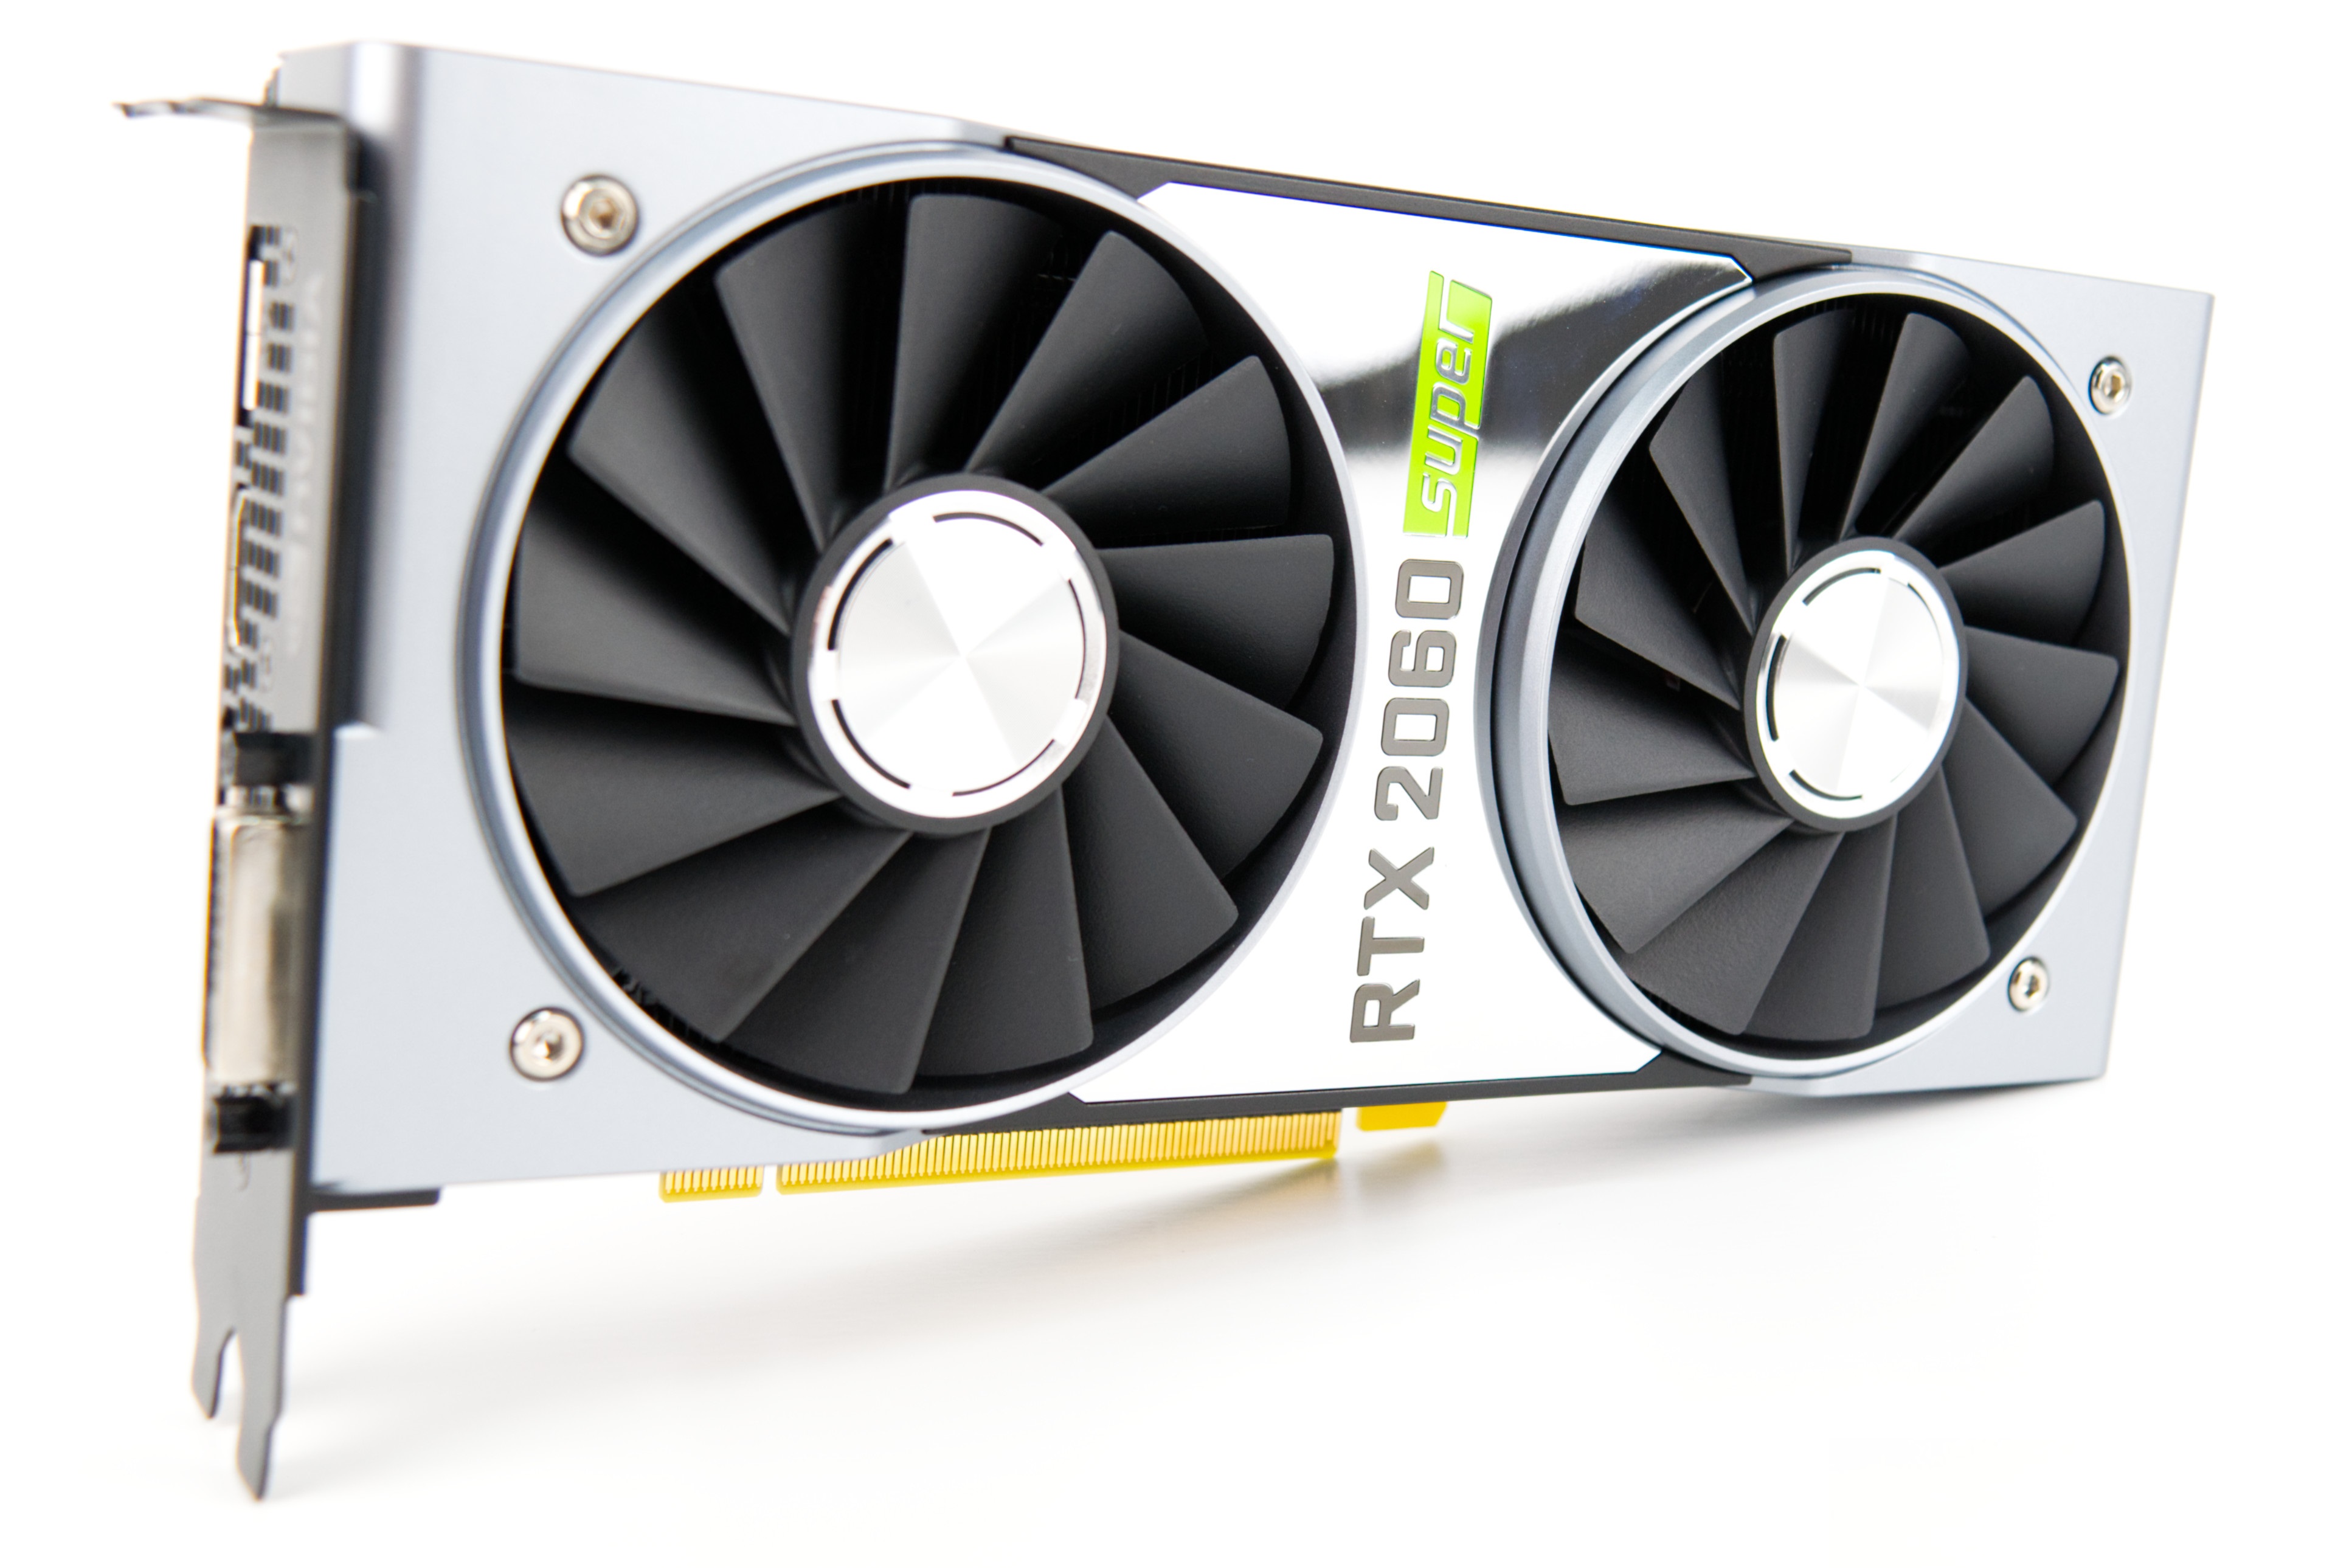 Nvidia GeForce RTX 2060 Super Review: The entry-level finally comes with 8 GB of VRAM - NotebookCheck.net Reviews